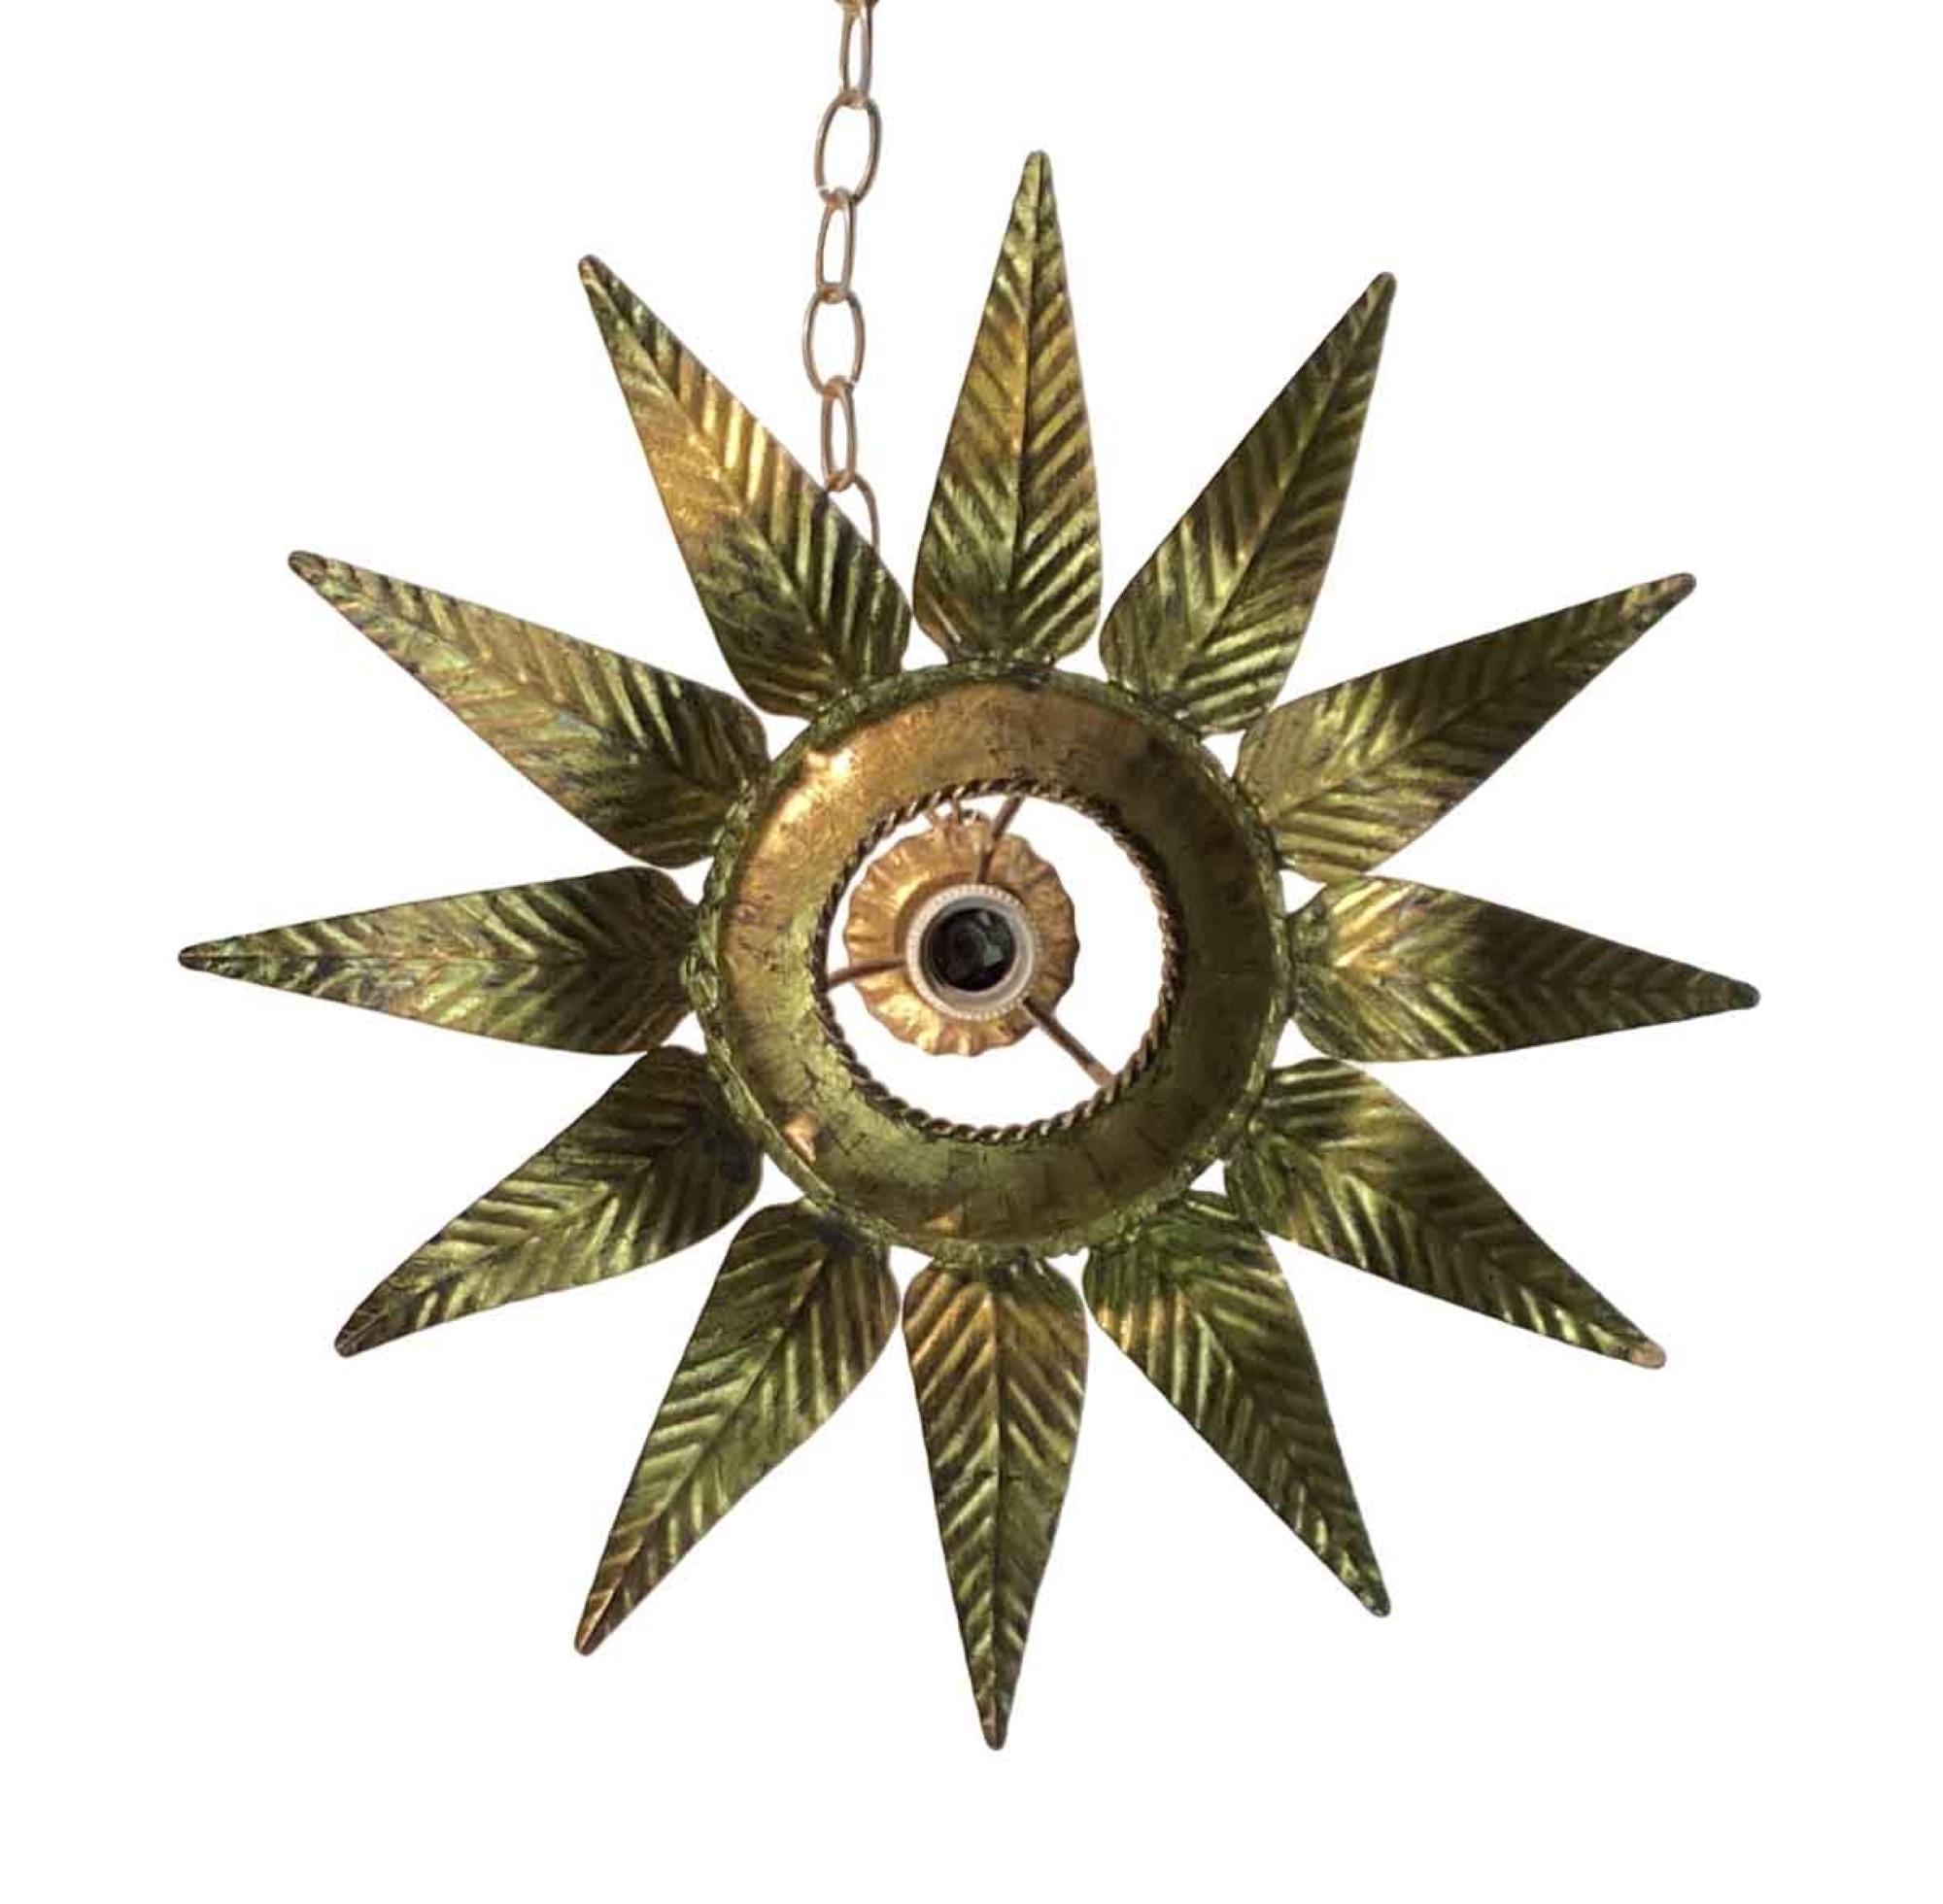 1970s hand hammered gilt leaf star burst pendant light. This can be seen at our 302 Bowery location in NoHo in Manhattan.